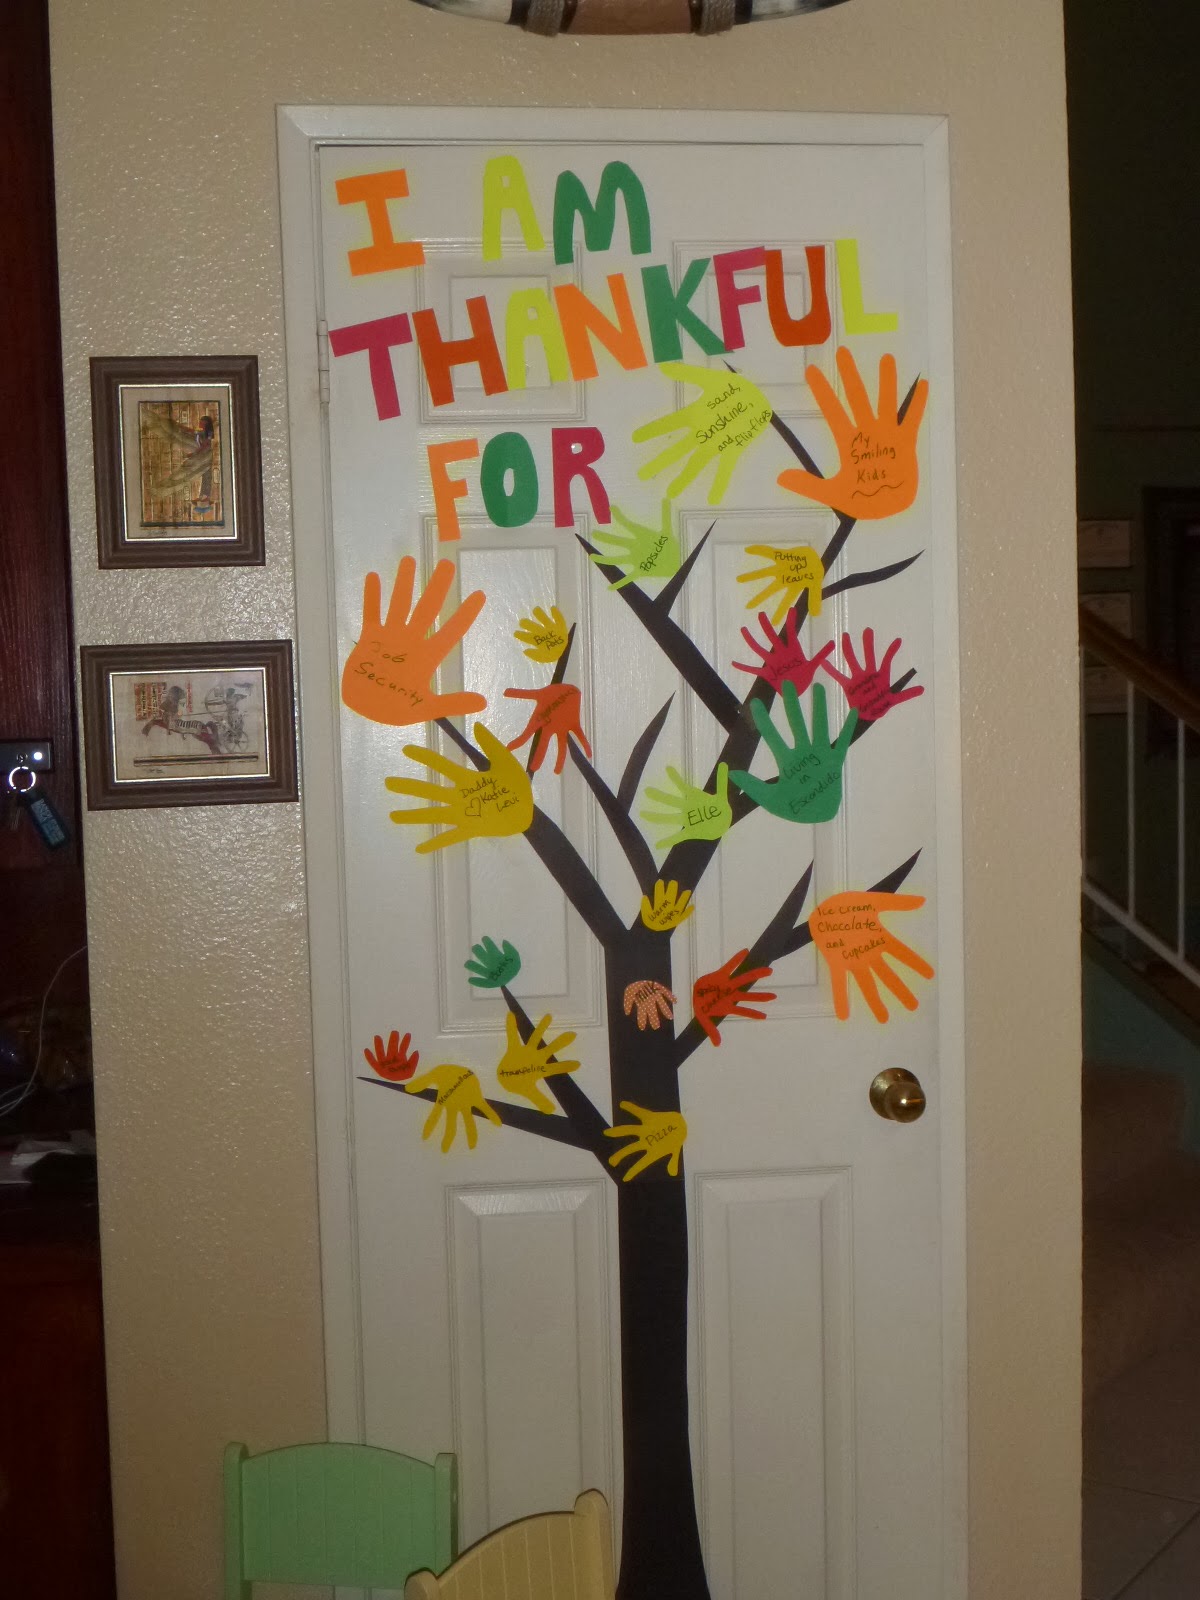 Handprint Thankful Tree Decoration Craft Idea For Thanksgiving - Activities to Allow Kids to Demonstrate Gratitude